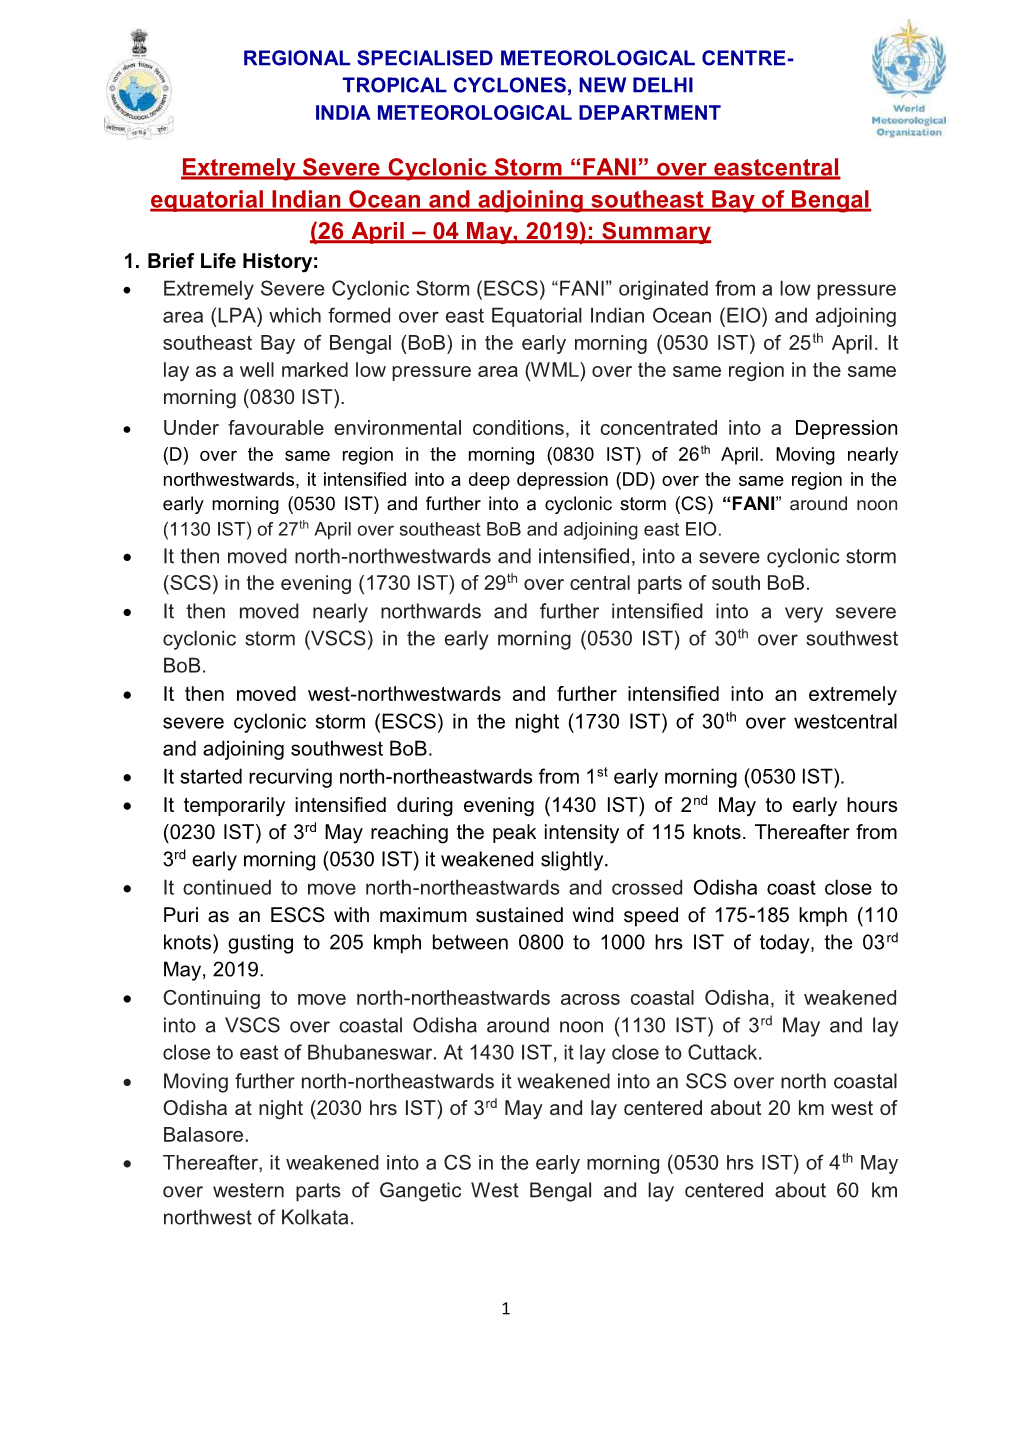 Extremely Severe Cyclonic Storm “FANI” Over Eastcentral Equatorial Indian Ocean and Adjoining Southeast Bay of Bengal (26 April – 04 May, 2019): Summary 1